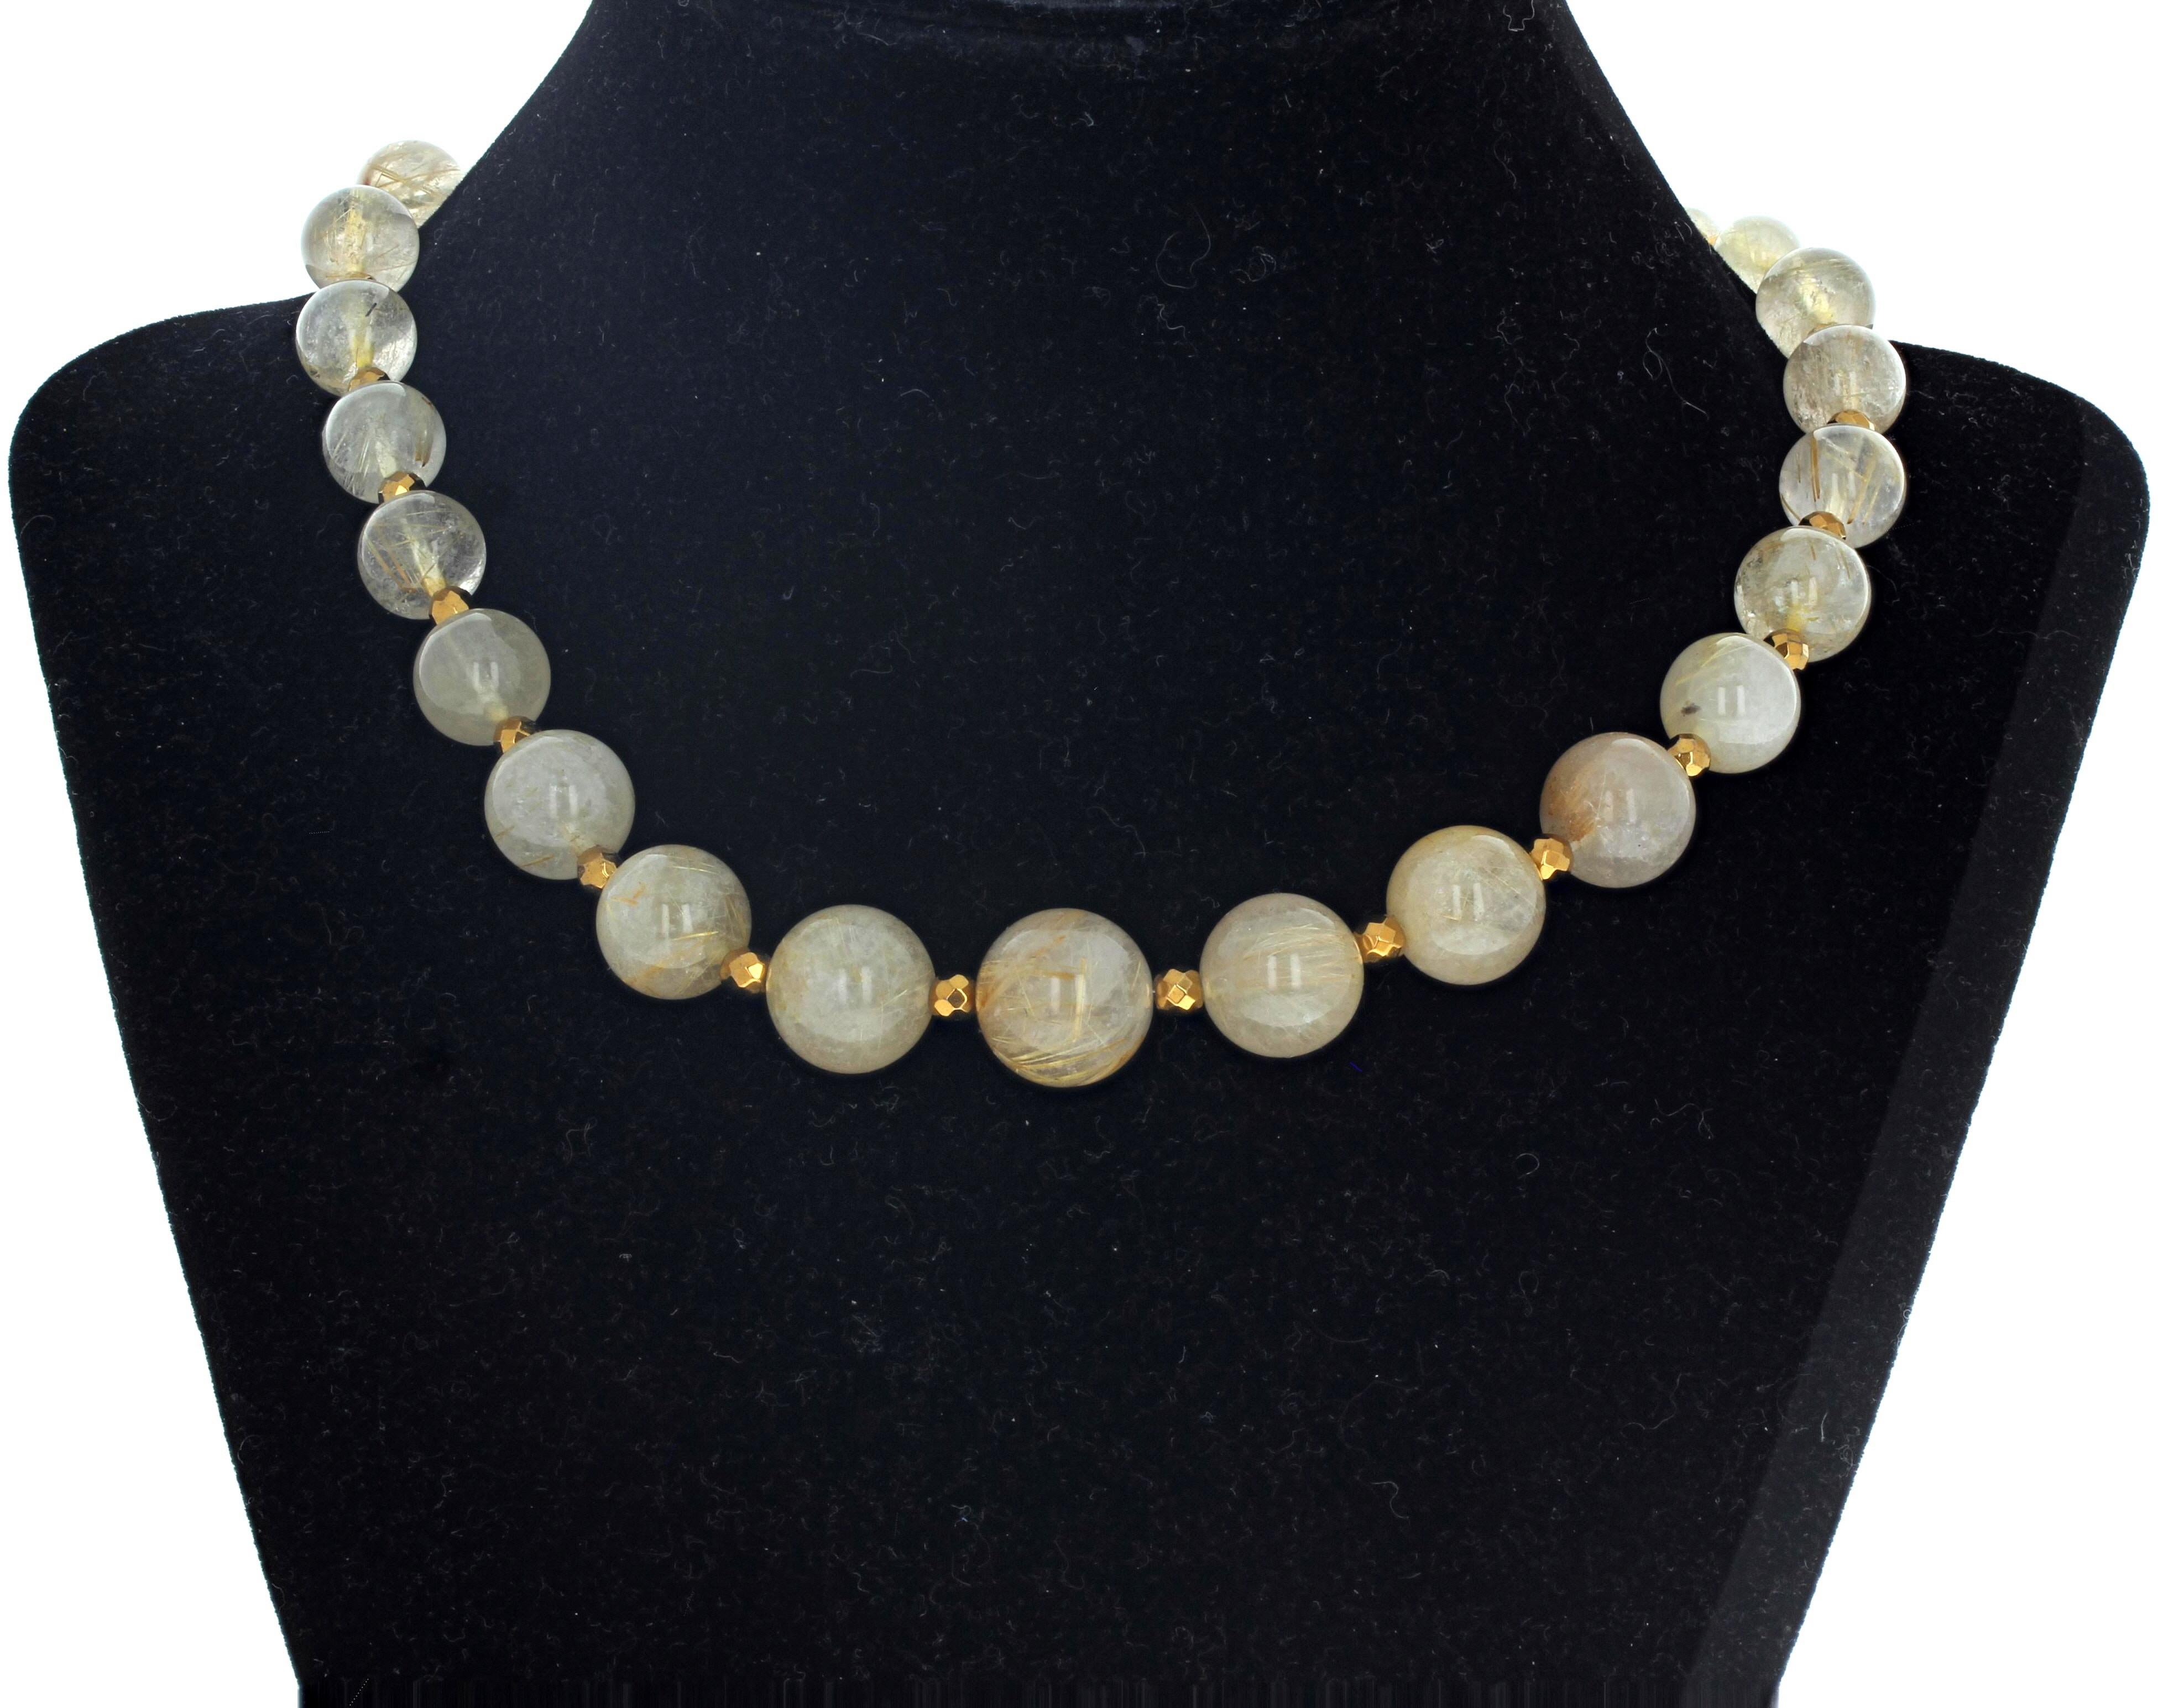 This lovely elegant 15 3/4 inch long natural polished round Rutilated Quartz is enhanced with gem cut and polished brilliant goldy spacers.  The largest Quartz is approximately 14mm.  The clasp is an easy to use gold plated hook clasp.  